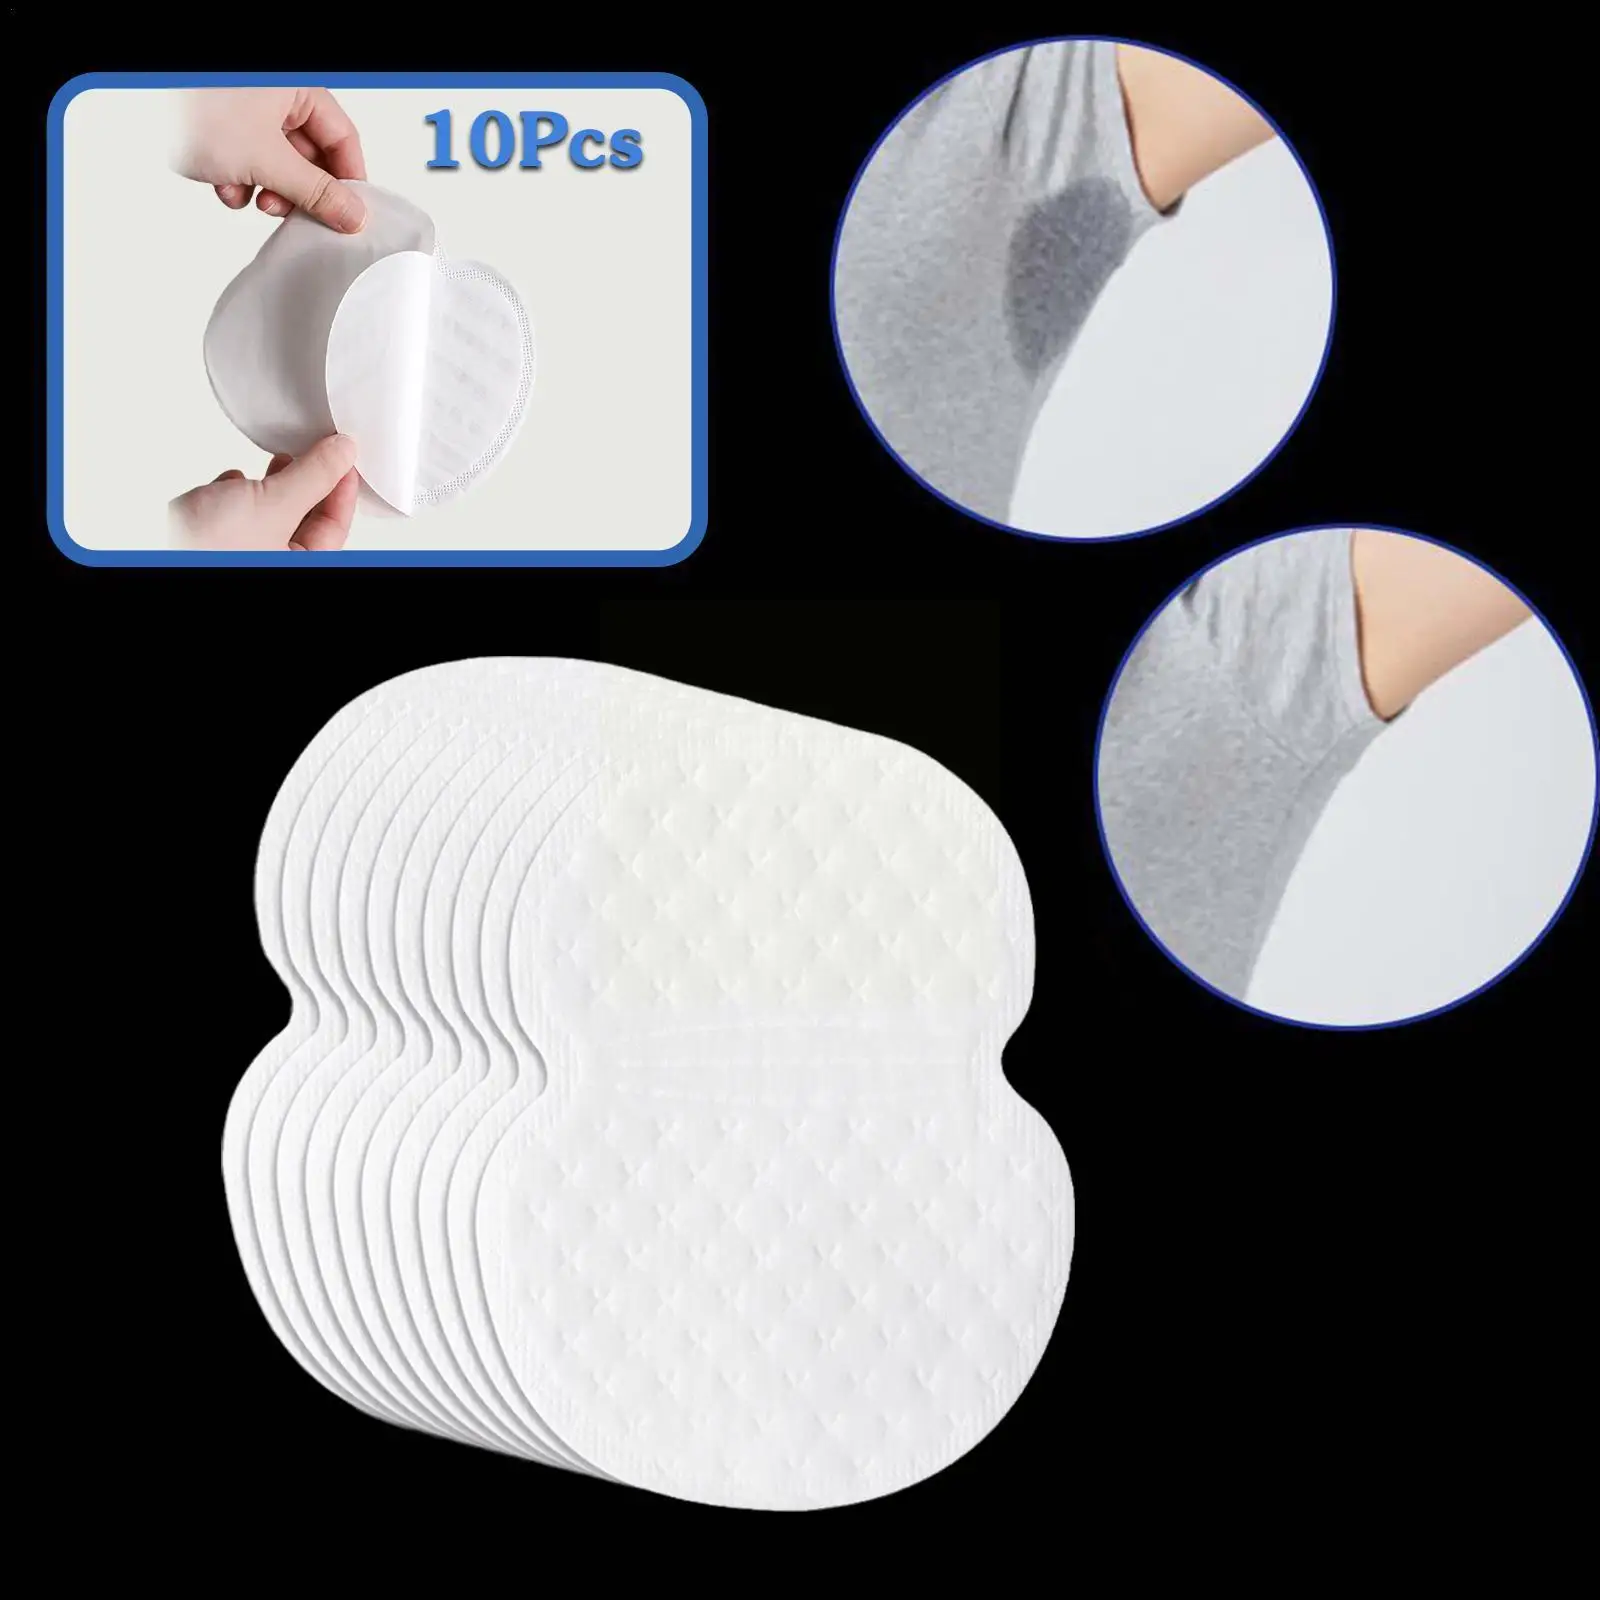 

10pcs Underarm Sweat Pads Absorb Liners Underarm Gasket From Sweat Armpit Stickers Anti Armpits Pads for Clothes Deodorant B6T6